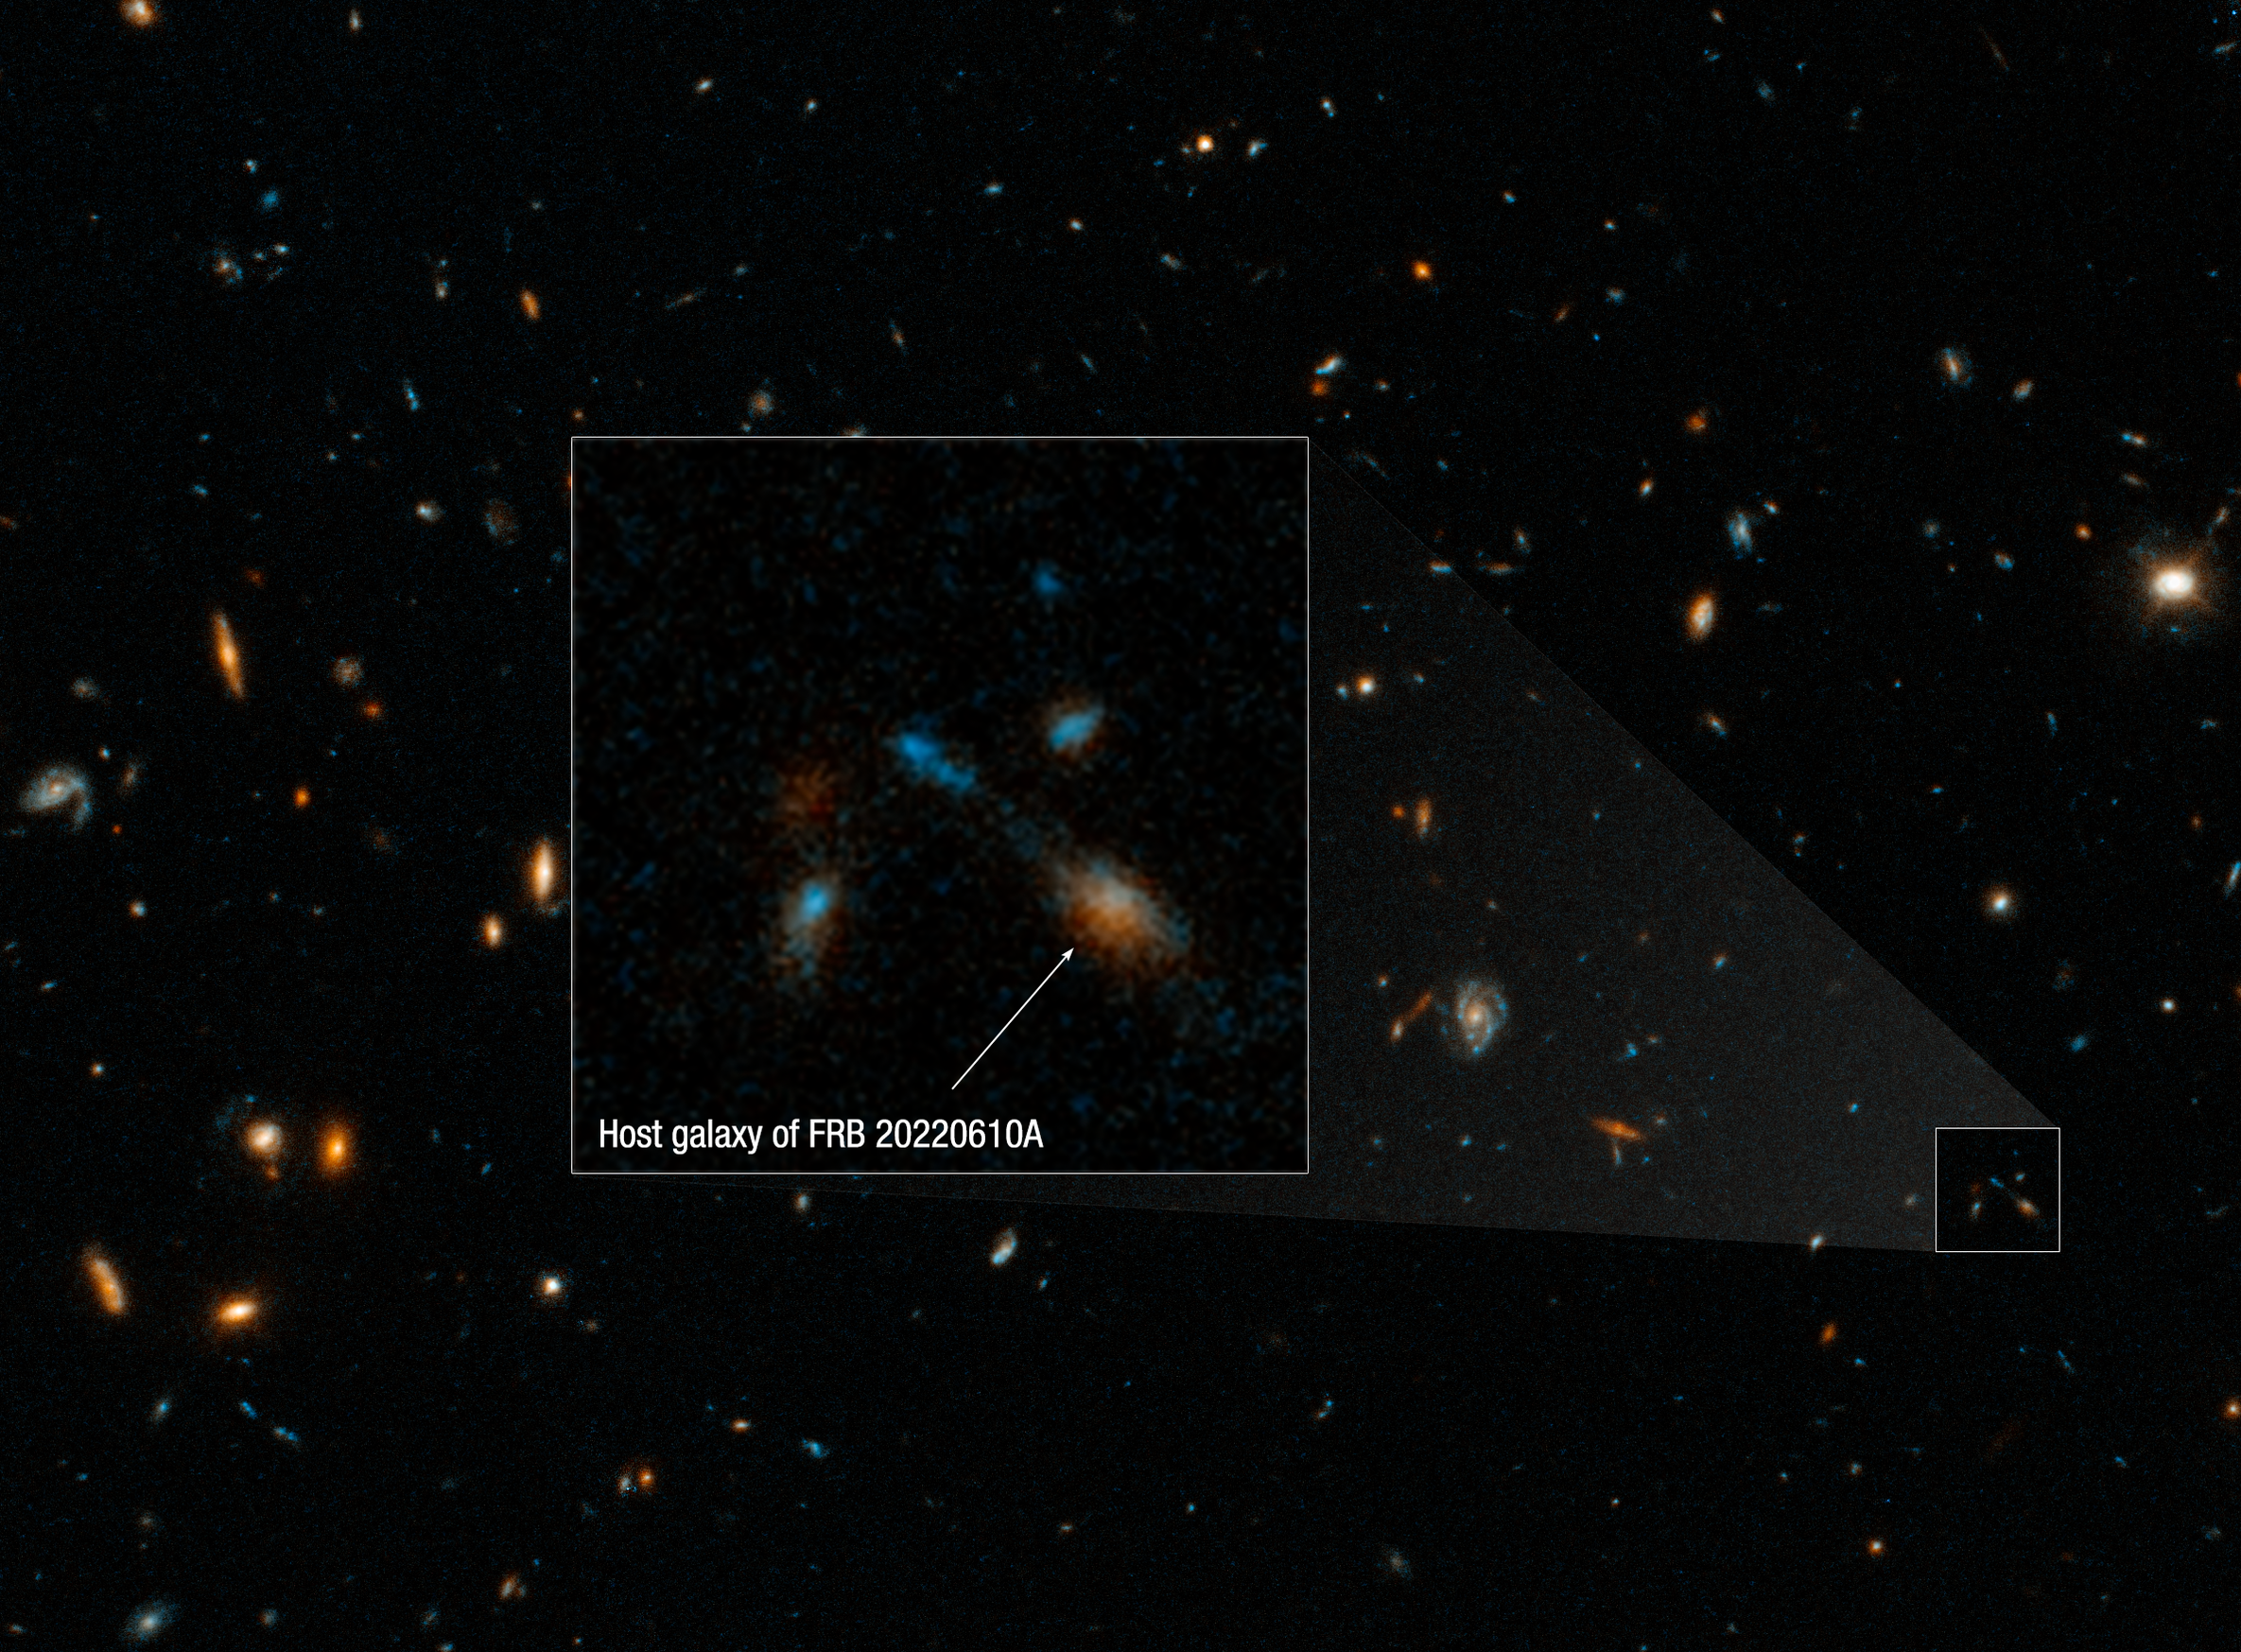 Black background dotted with galaxies. A square box in the lower-right quadrant of the image denotes a callout that provides an expanded view of that region. The expanded box view (just left of image center) reveals the host galaxy of the Fast Radio Burst.